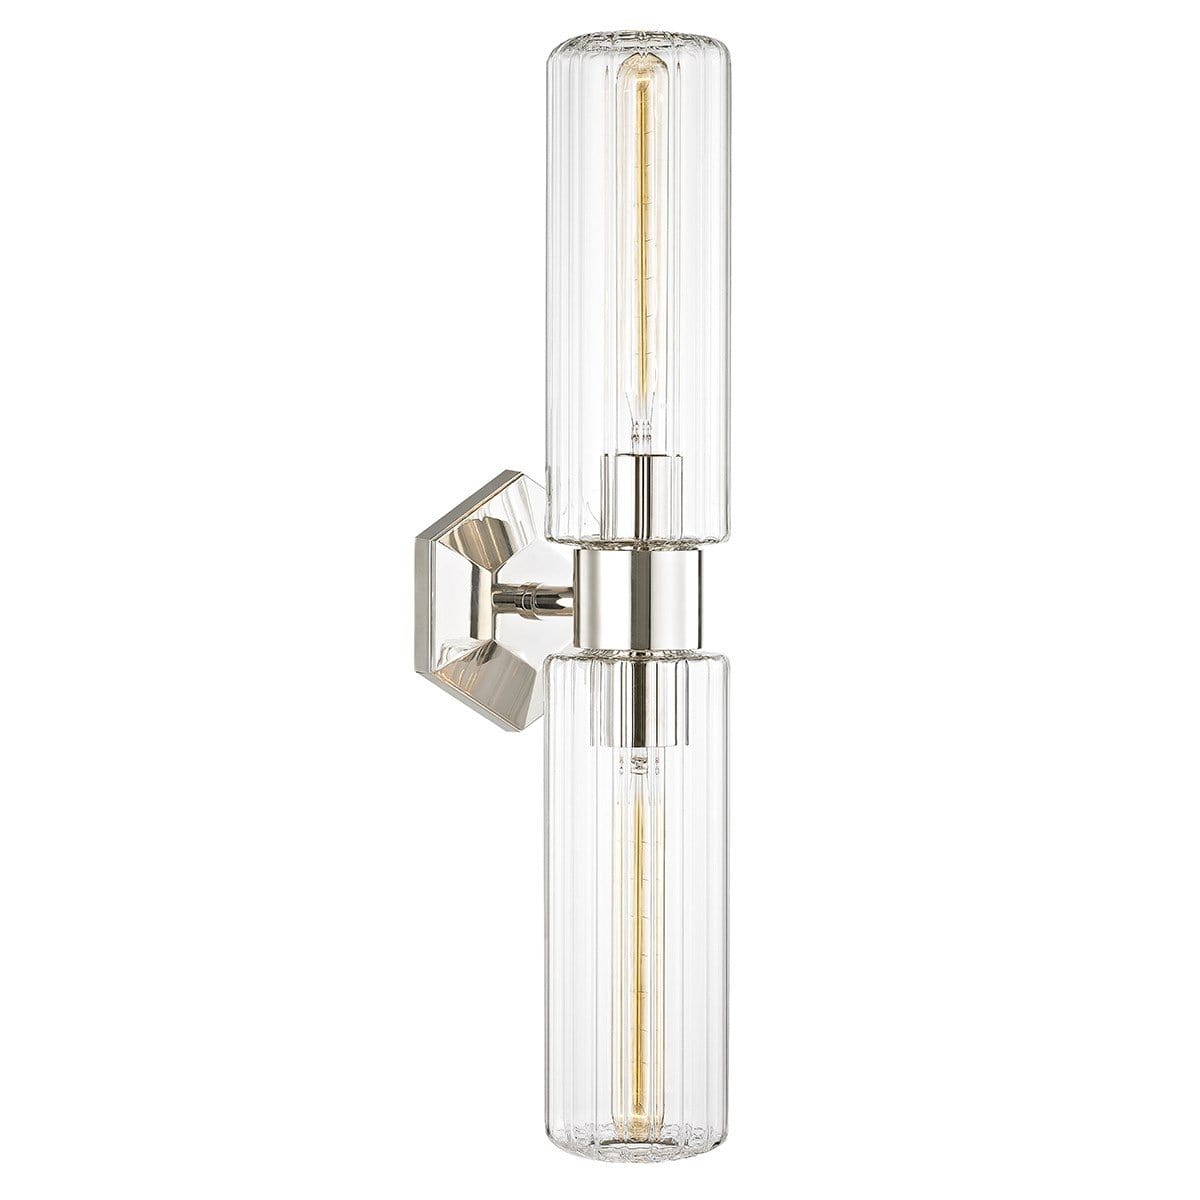 Hudson Valley Lighting 1022-PN Dubois 2-Light Wall Sconce - 11.5 Inches  Wide by 12.5 Inches High, Finish Color: Polished Nickel